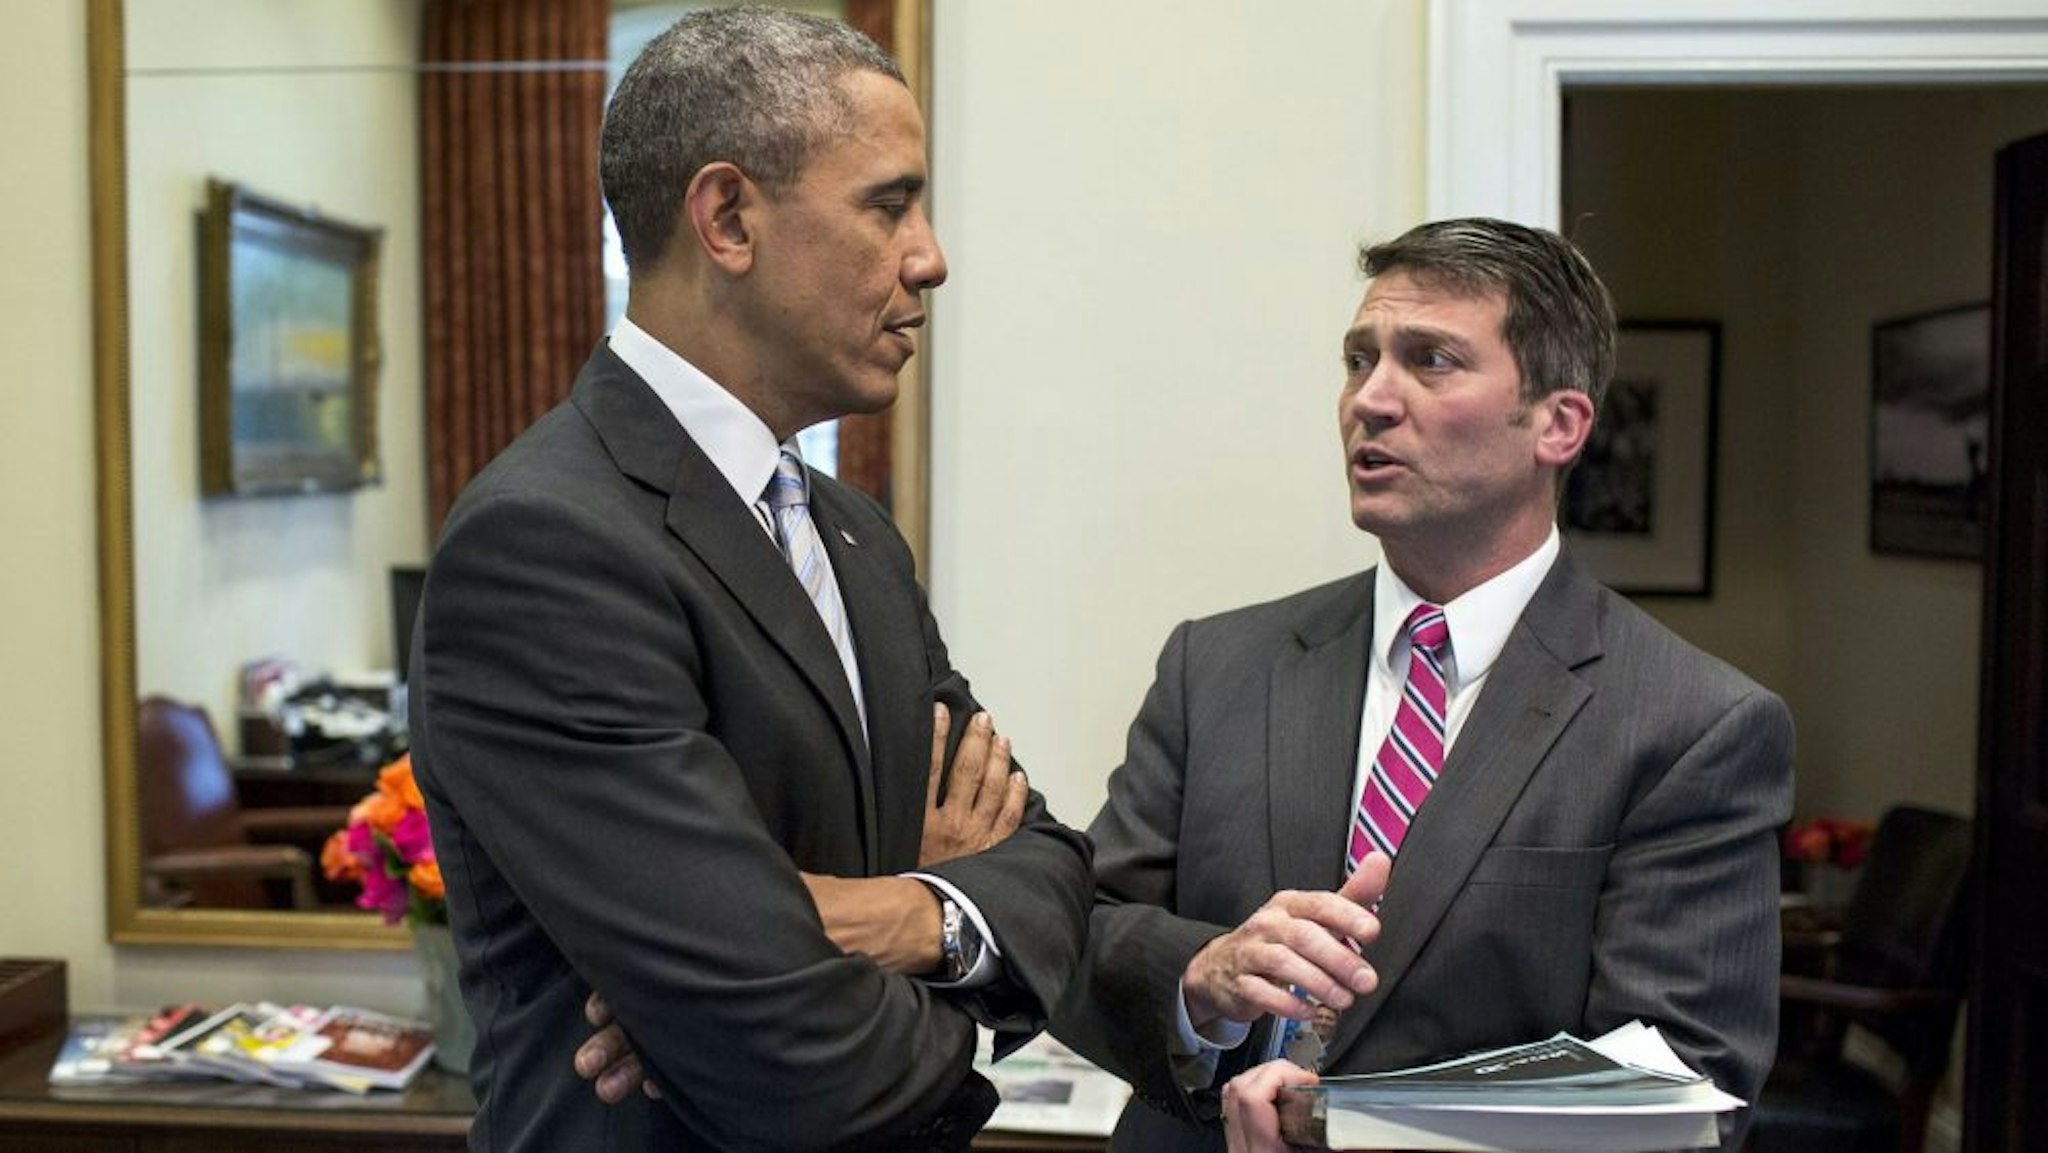 President Barack Obama speaks with Dr. Ronny Jackson in the Outer Oval Office, Feb. 21, 2014.